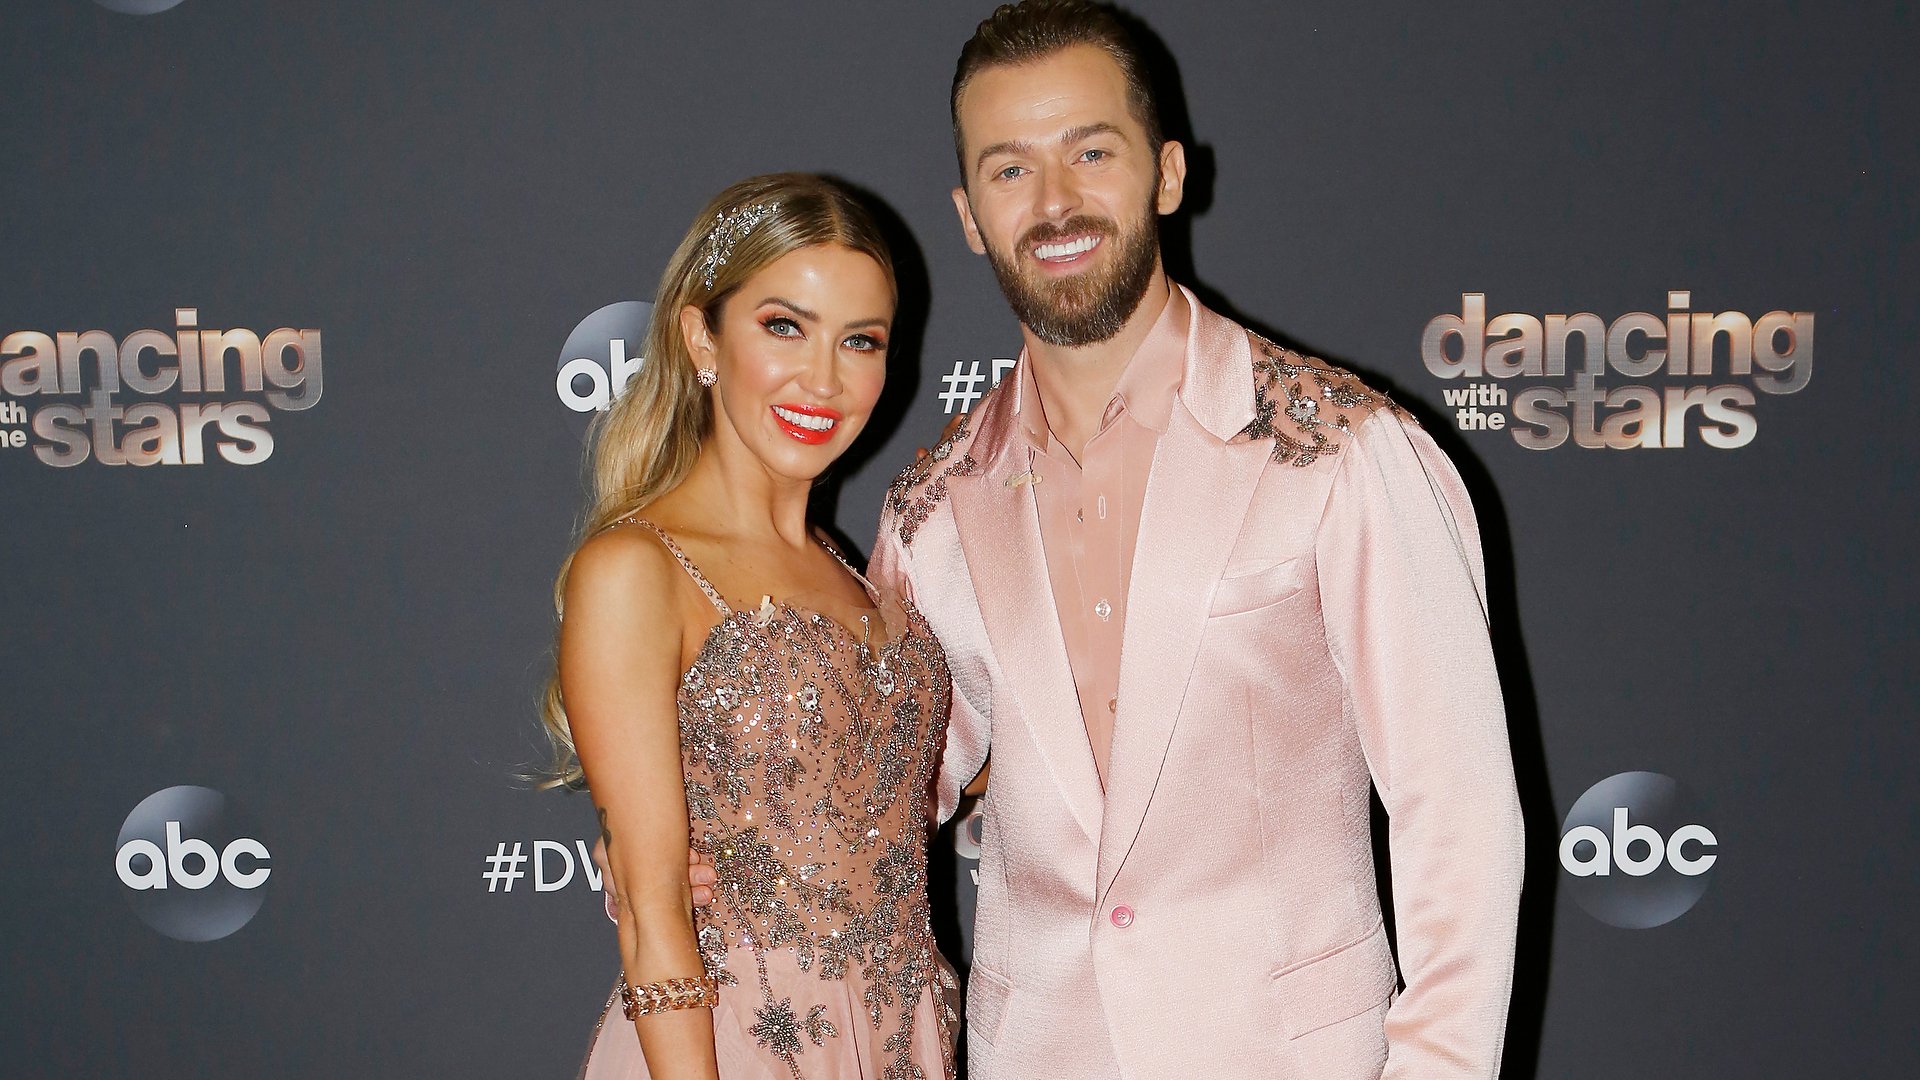 ‘Bachelorette’ Star Kaitlyn Bristowe Says She’s ‘Freaking Out’ Ahead of ‘Dancing with the Stars’ Disney Night